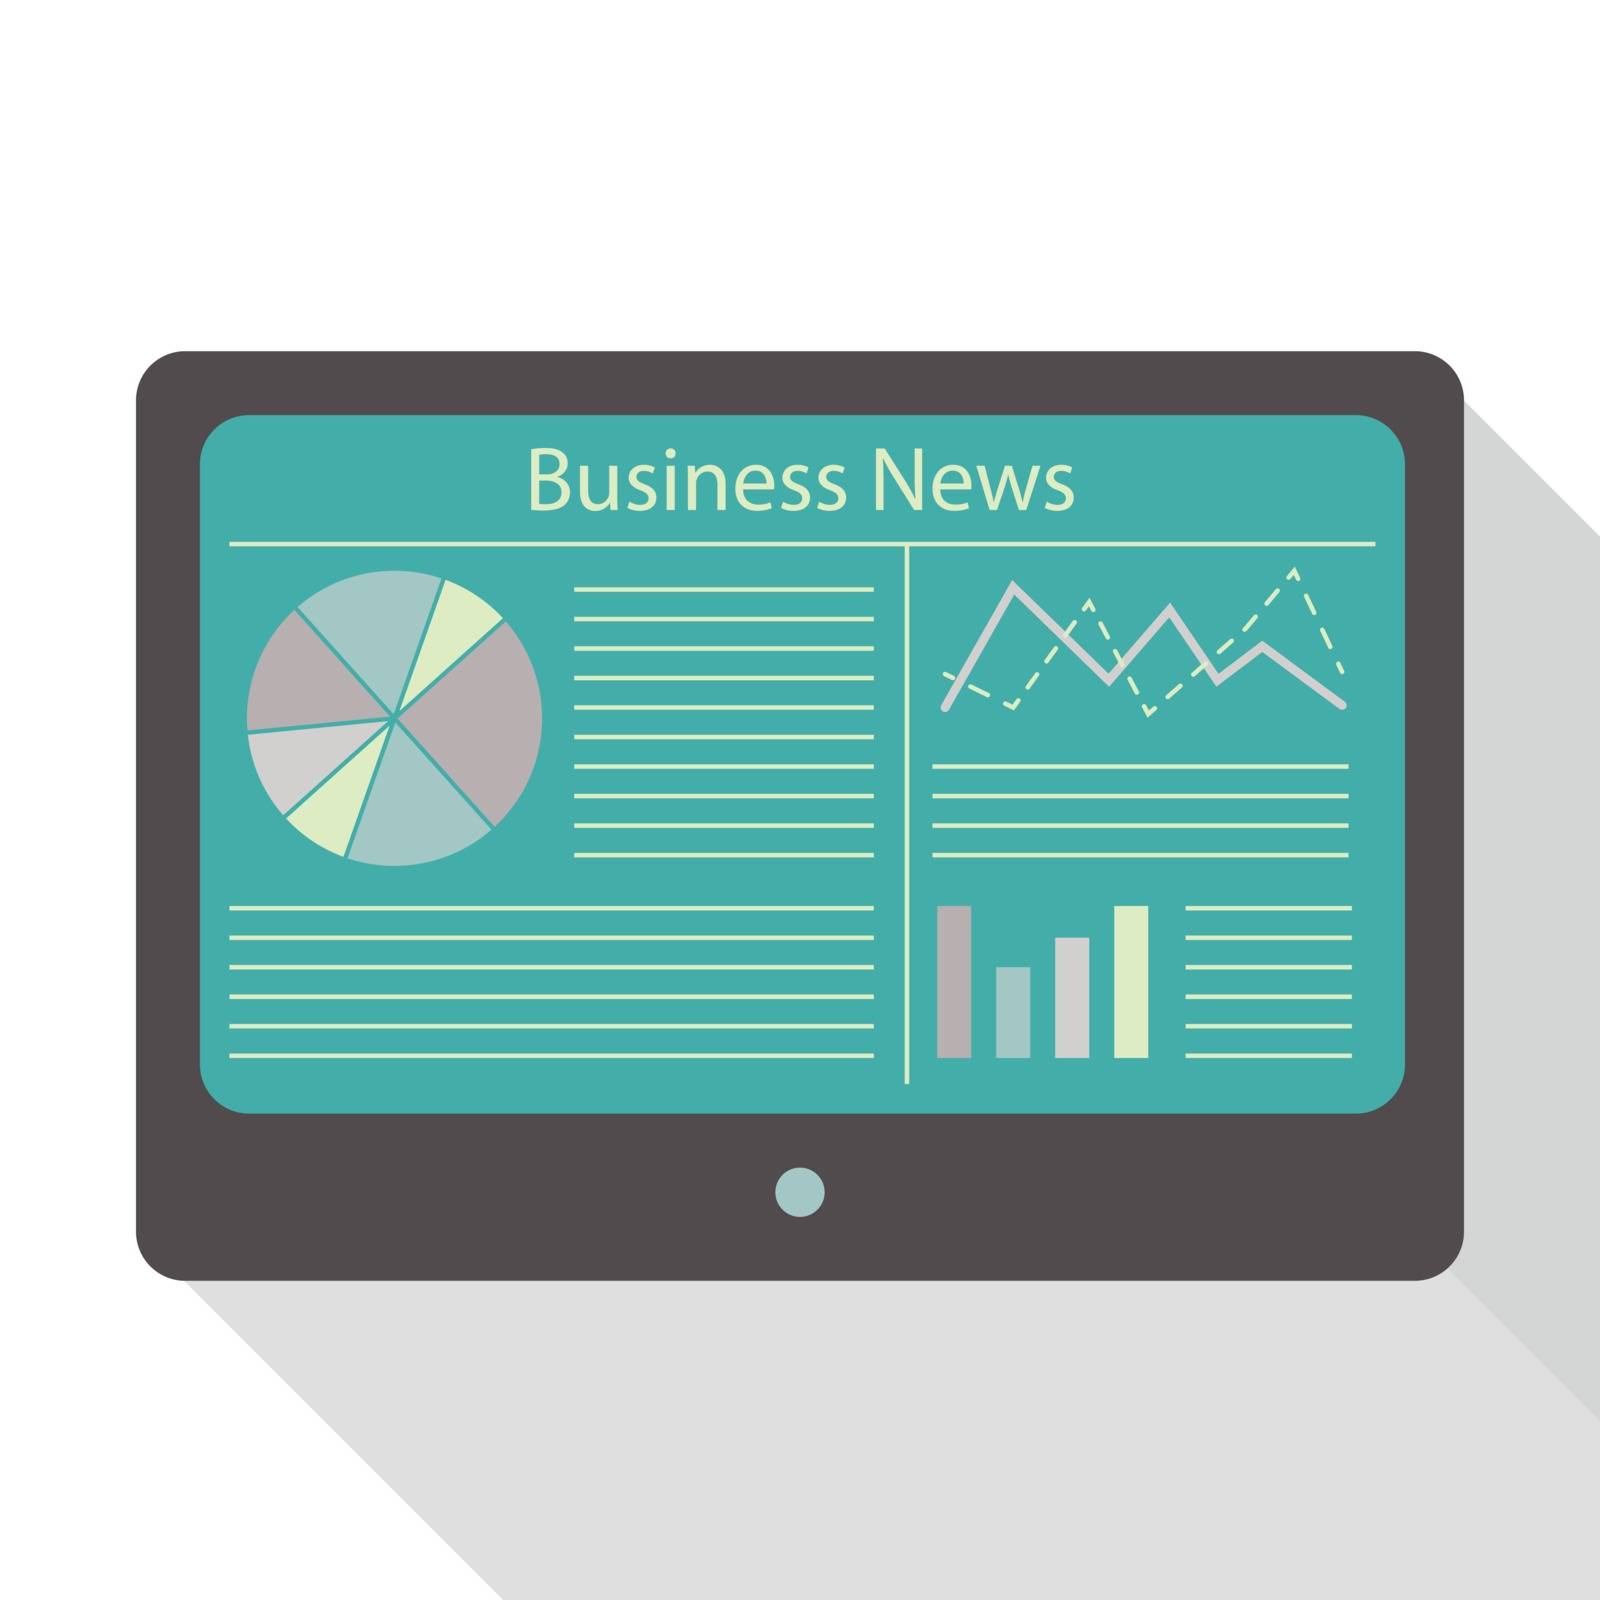 tablet display business news information with graphs in flat design with shadow - infographic